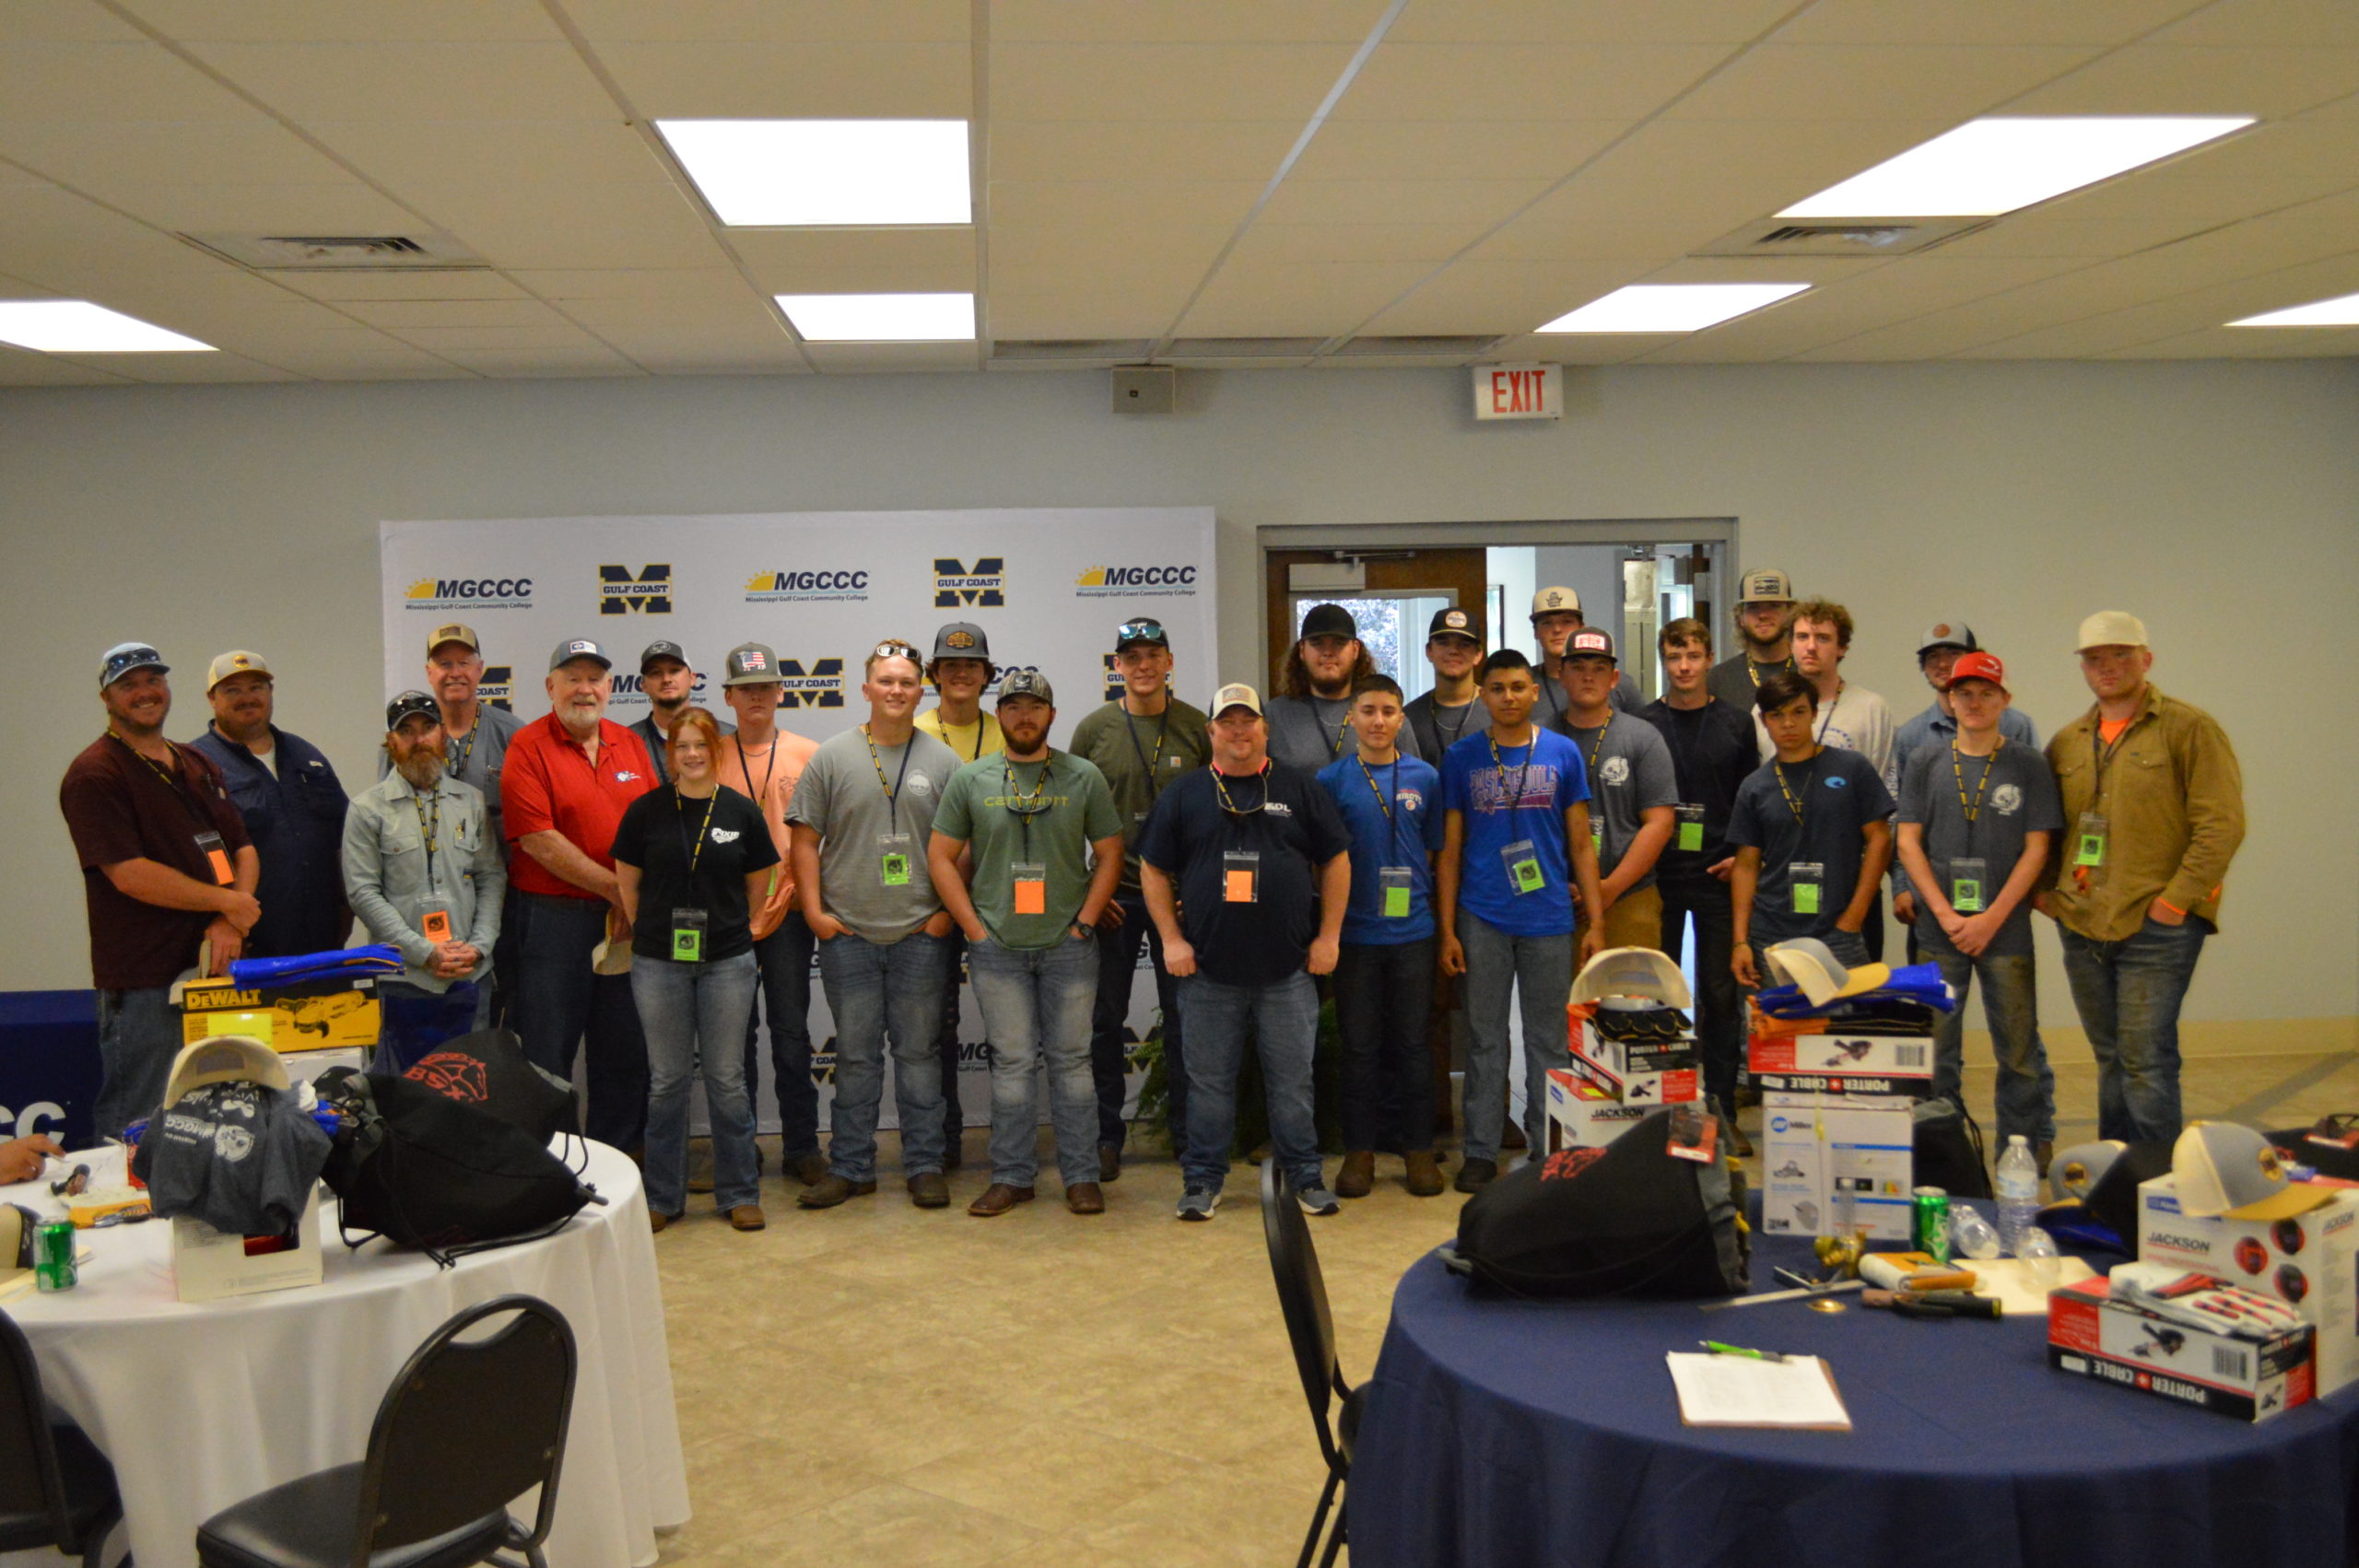 Competitors in the Welding Competition